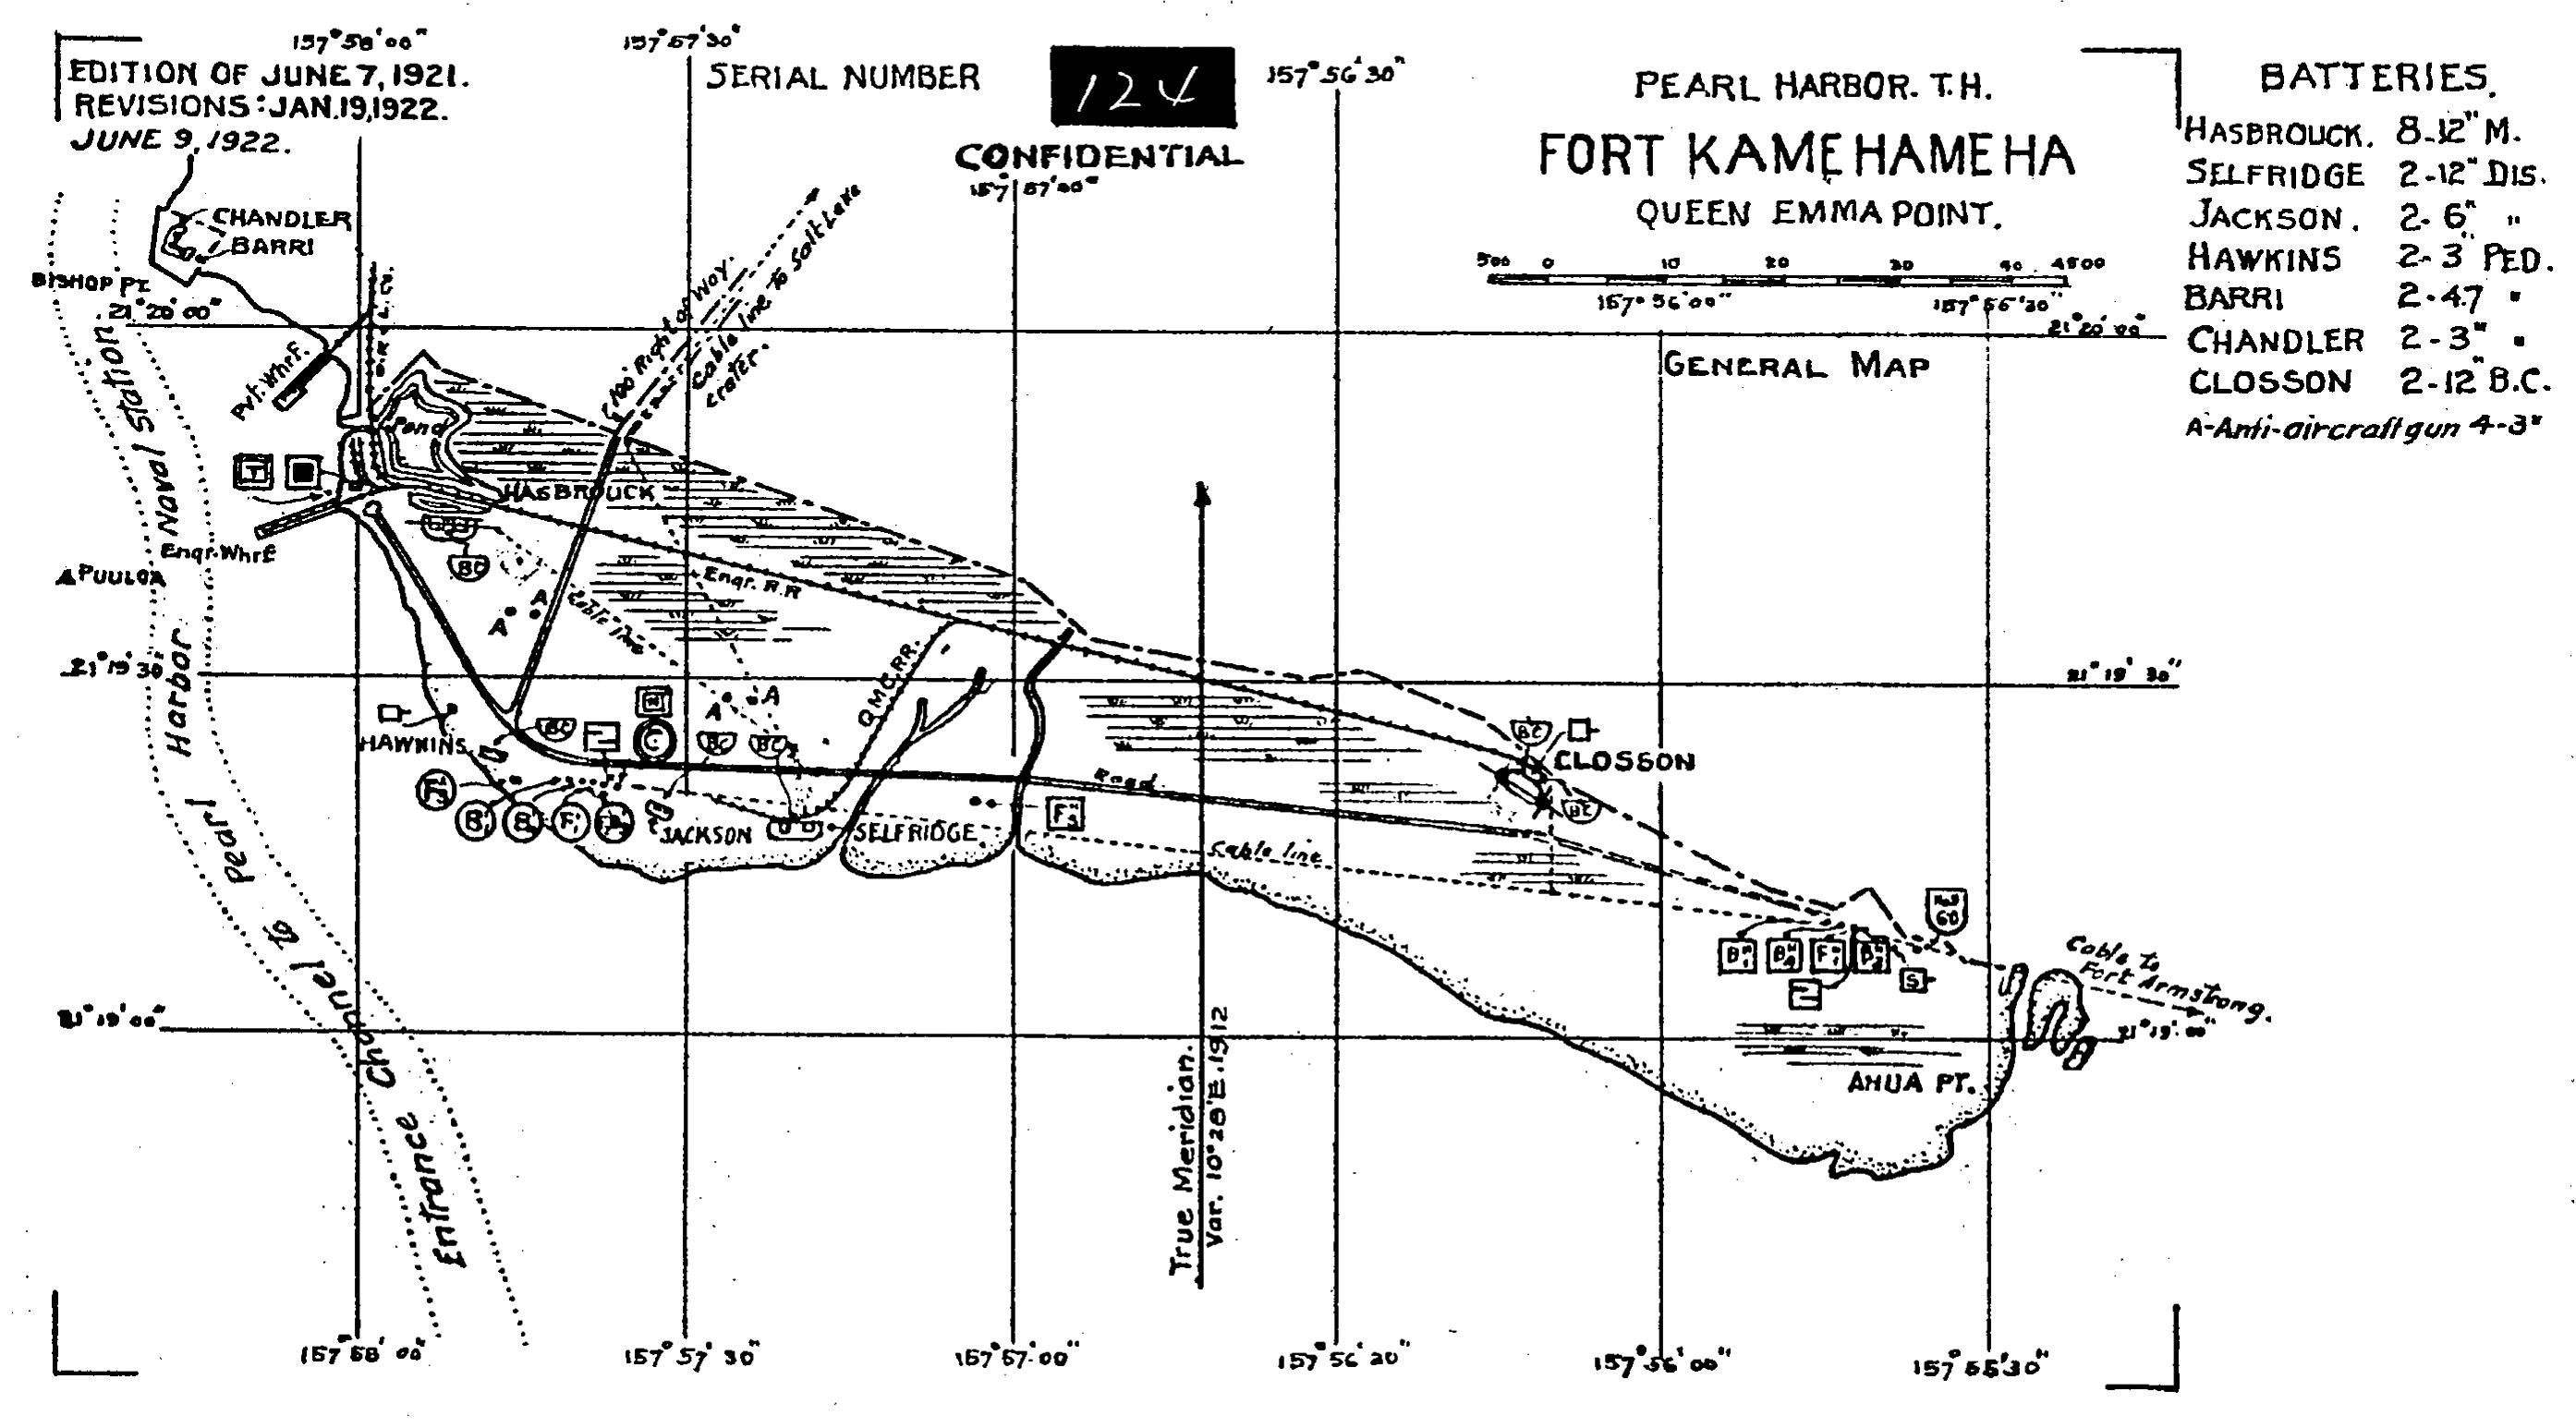 Diagram of the coastal batteries of Fort Kamehameha along the eastern shore of the Pearl Harbor channel opening, Oahu, Hawaii, 1922.